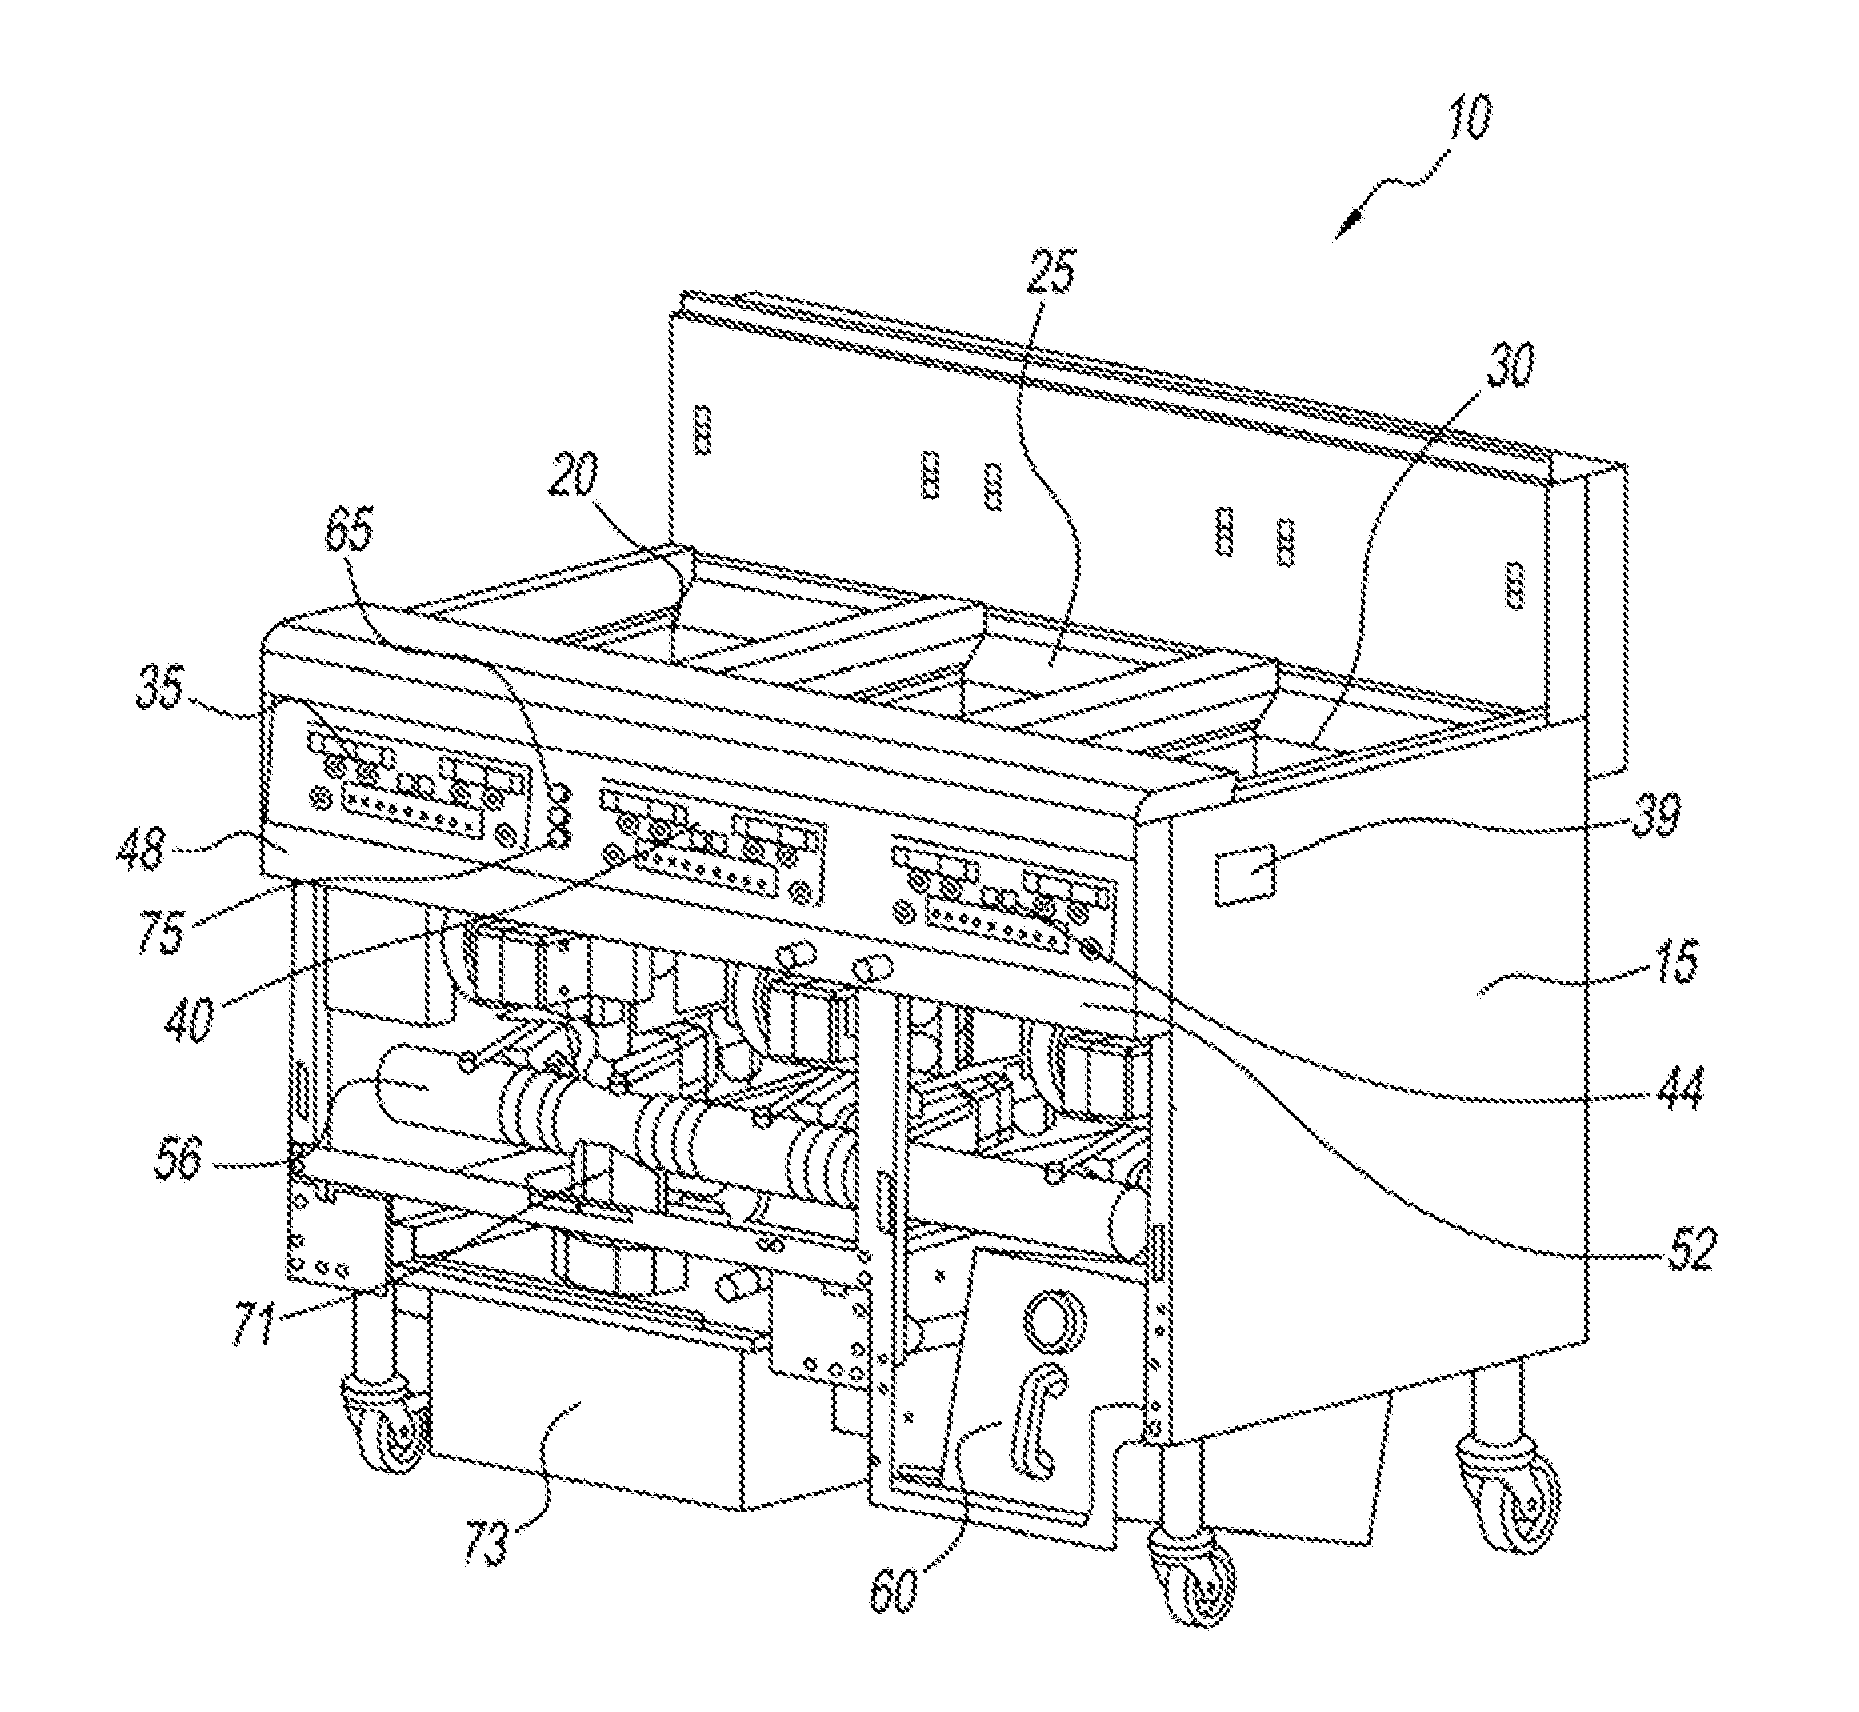 System and method to extend cooking oil life in fryers